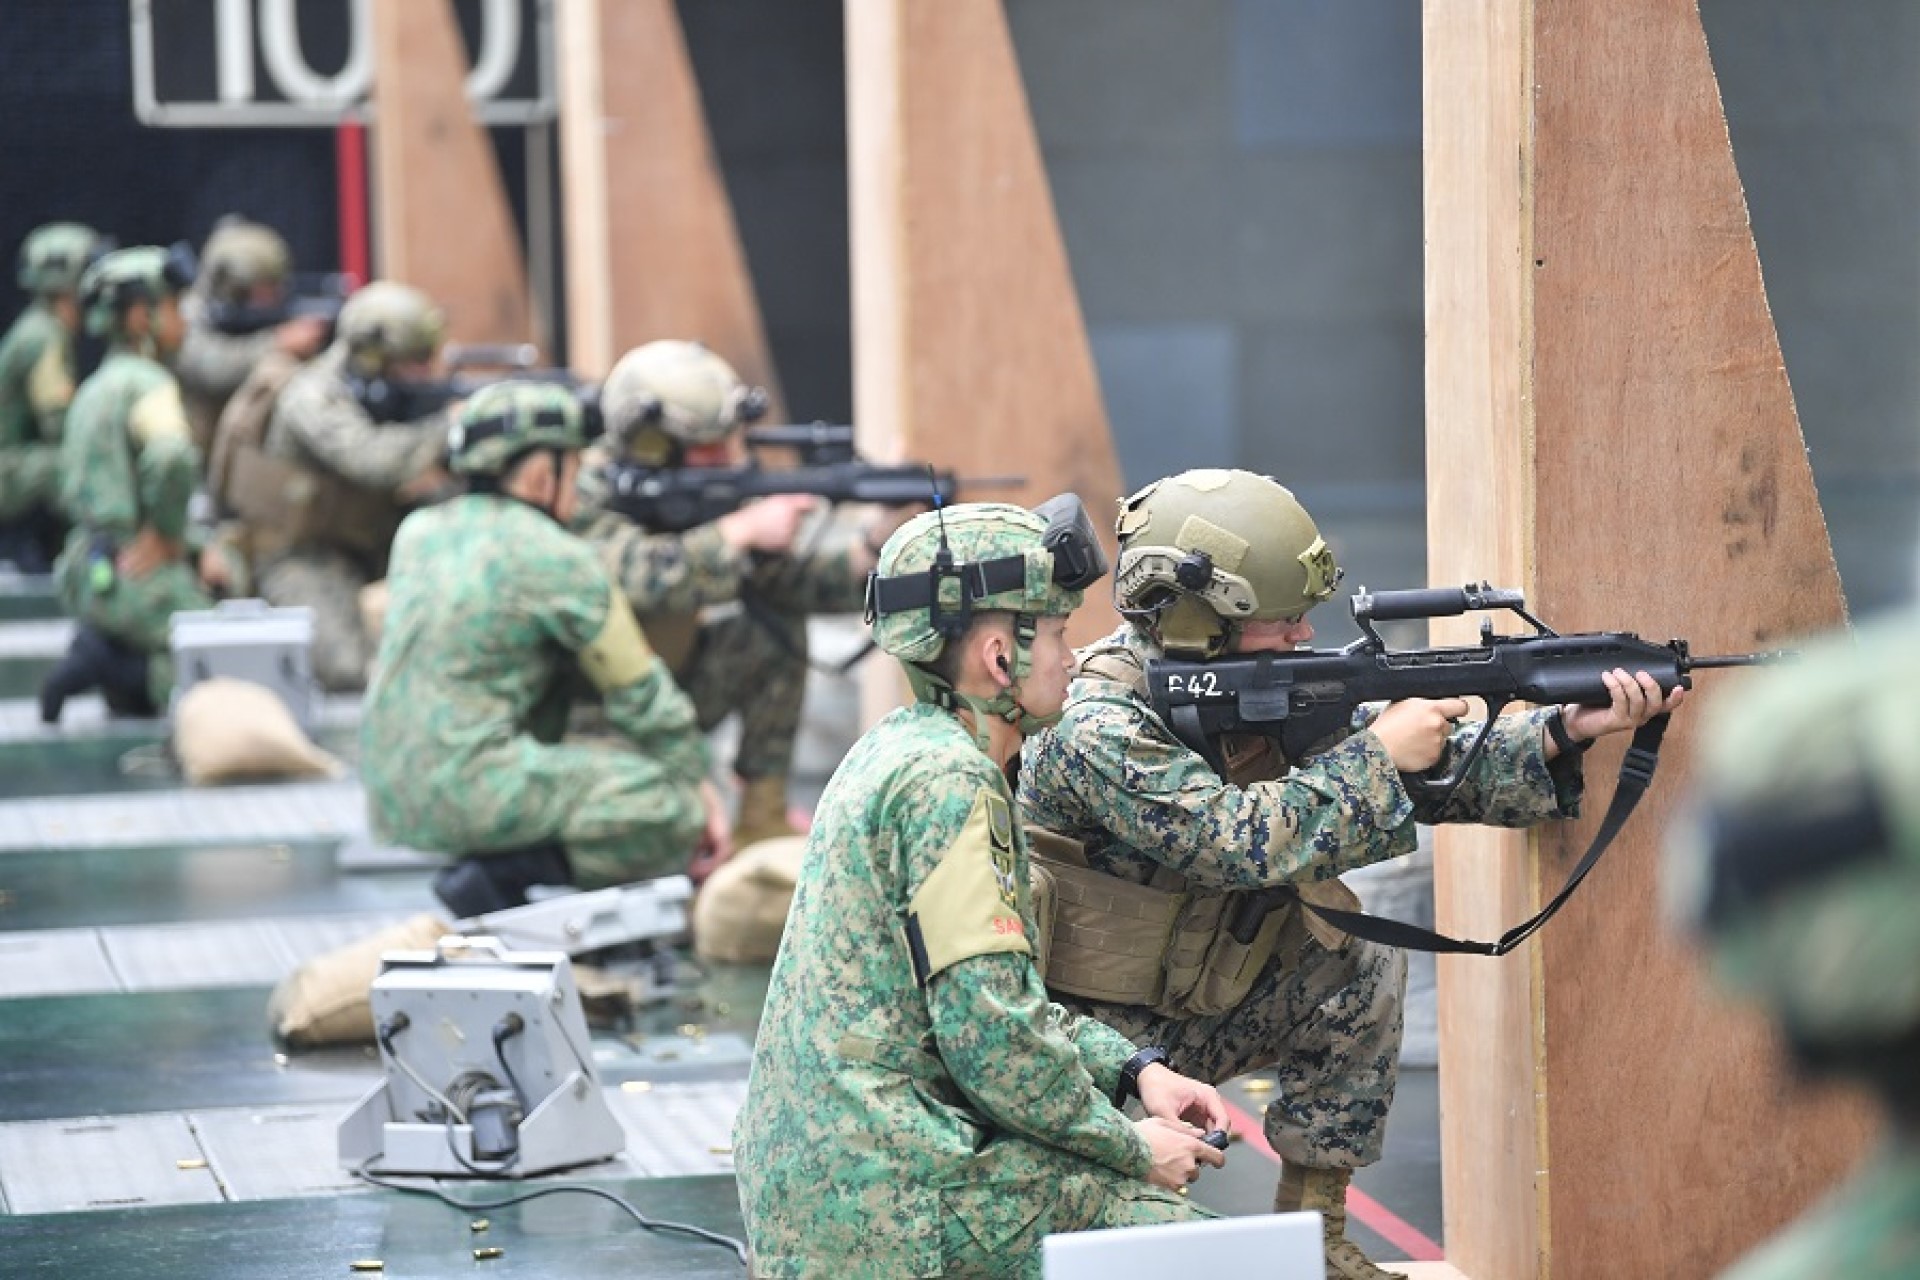 SAF and USMC personnel undergoing a live-firing session at the Multi Mission Range Complex.